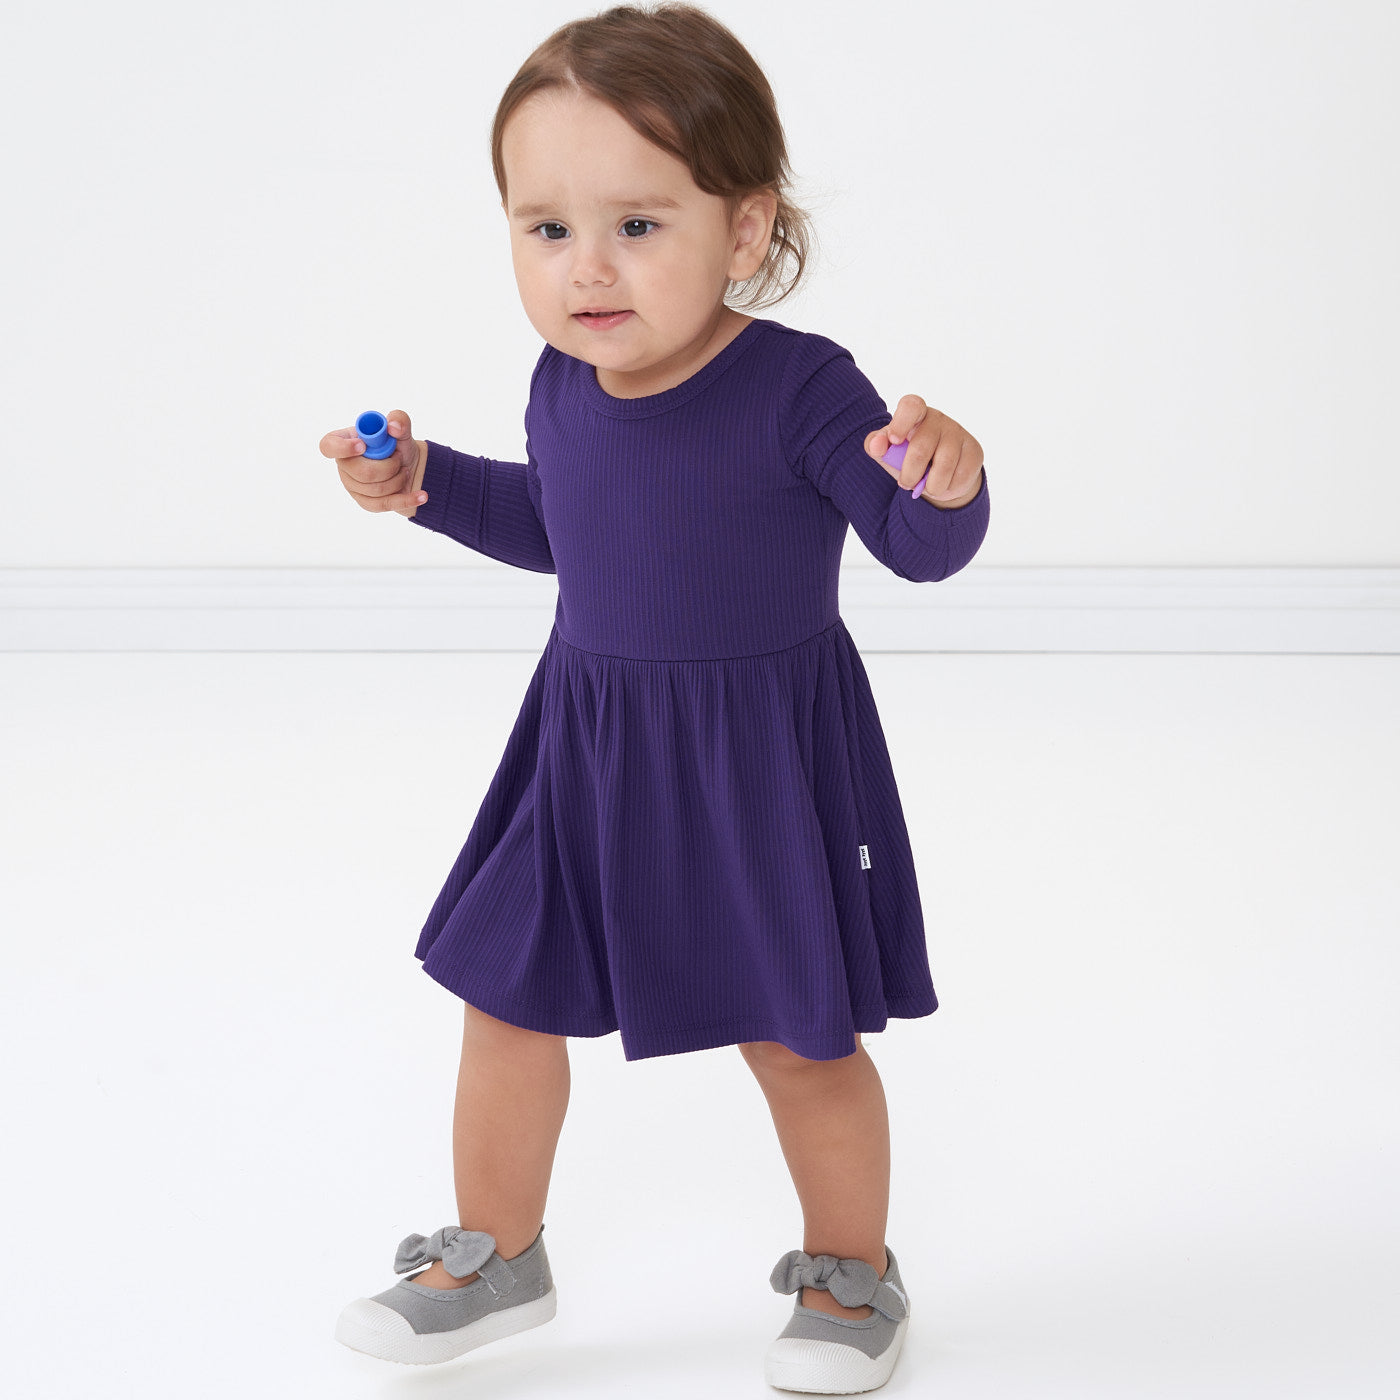 Child wearing a Deep Amethyst ribbed twirl dress with bodysuit